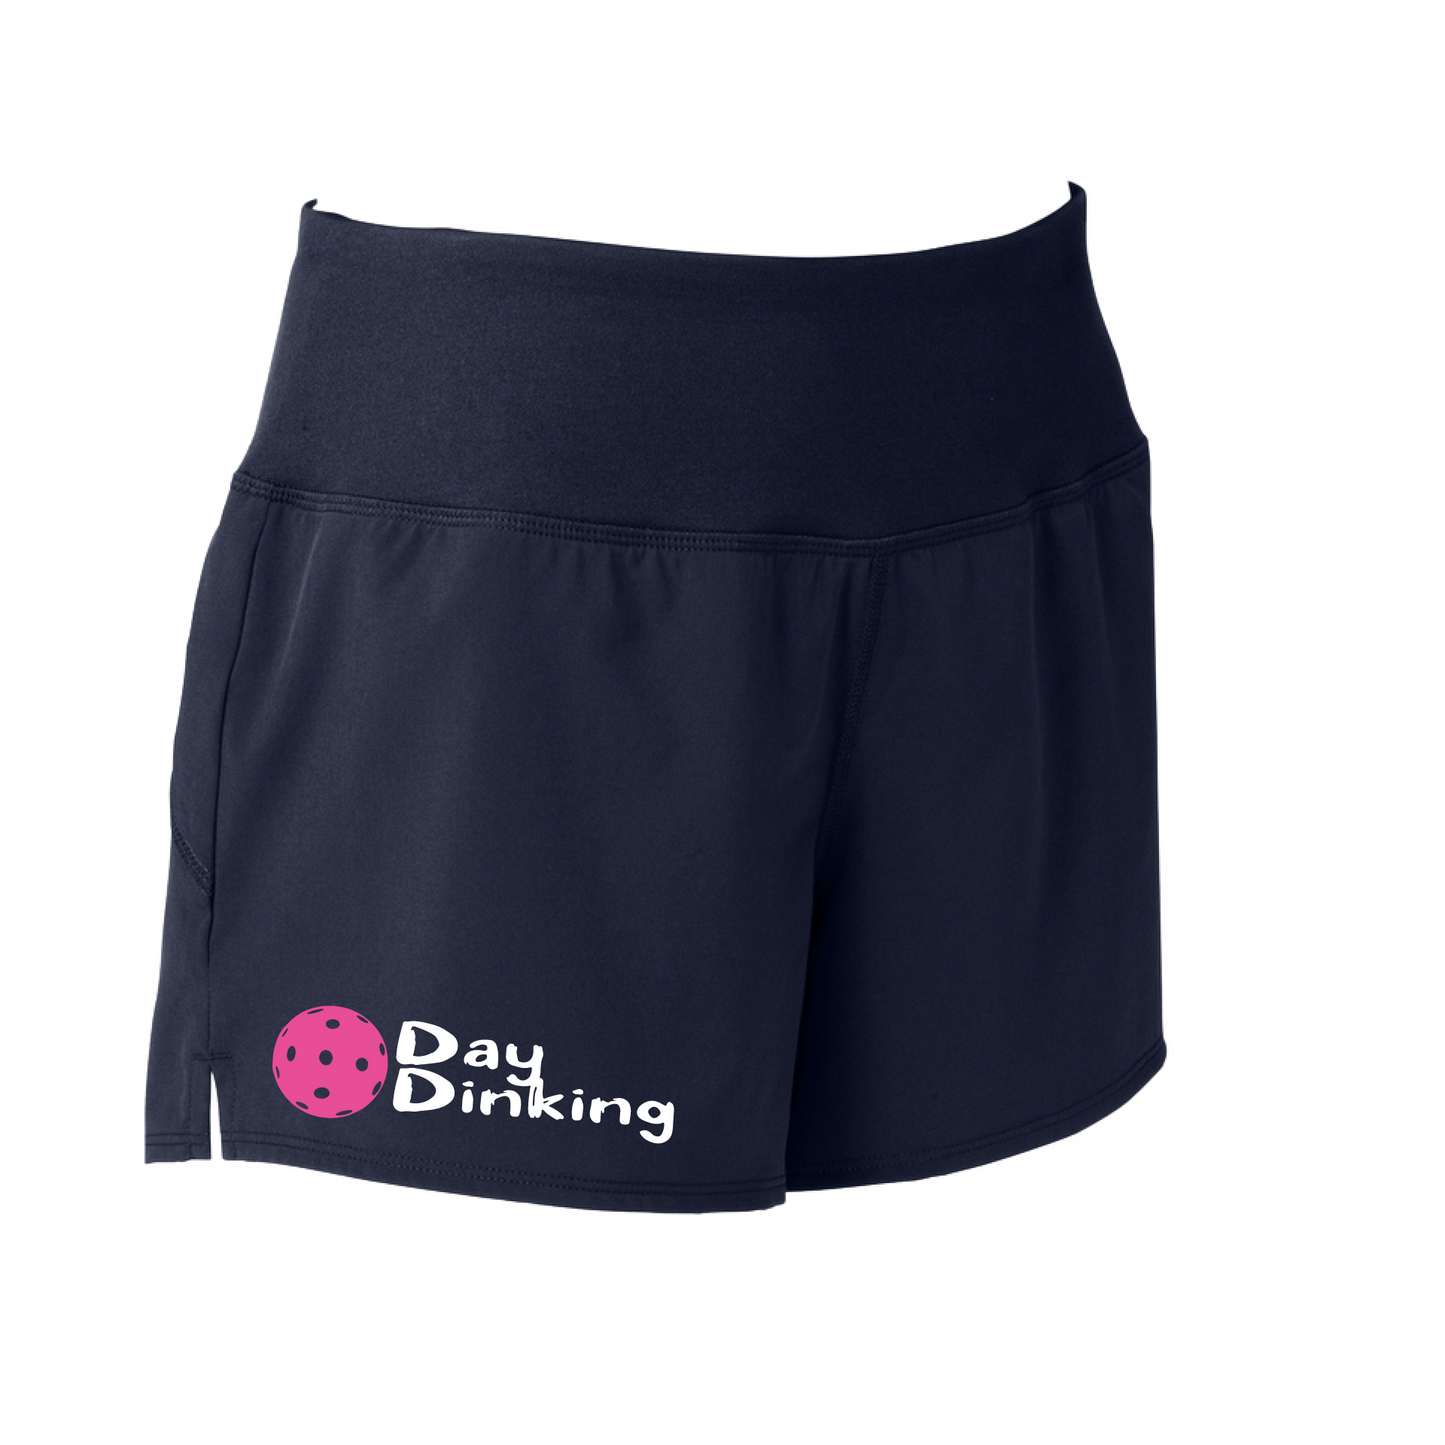 Shorts Designs: Day Dinking with Customizable Pickleball Color (Cyan, Green, Orange, & Pink).  Sport Tek women’s repeat shorts come with built-in cell phone pocket on the exterior of the waistband. You can also feel secure knowing that no matter how strenuous the exercise, the shorts will remain in place (it won’t ride up!). These shorts are extremely versatile and trendy. Transition from the Pickleball court to running errands smoothly.